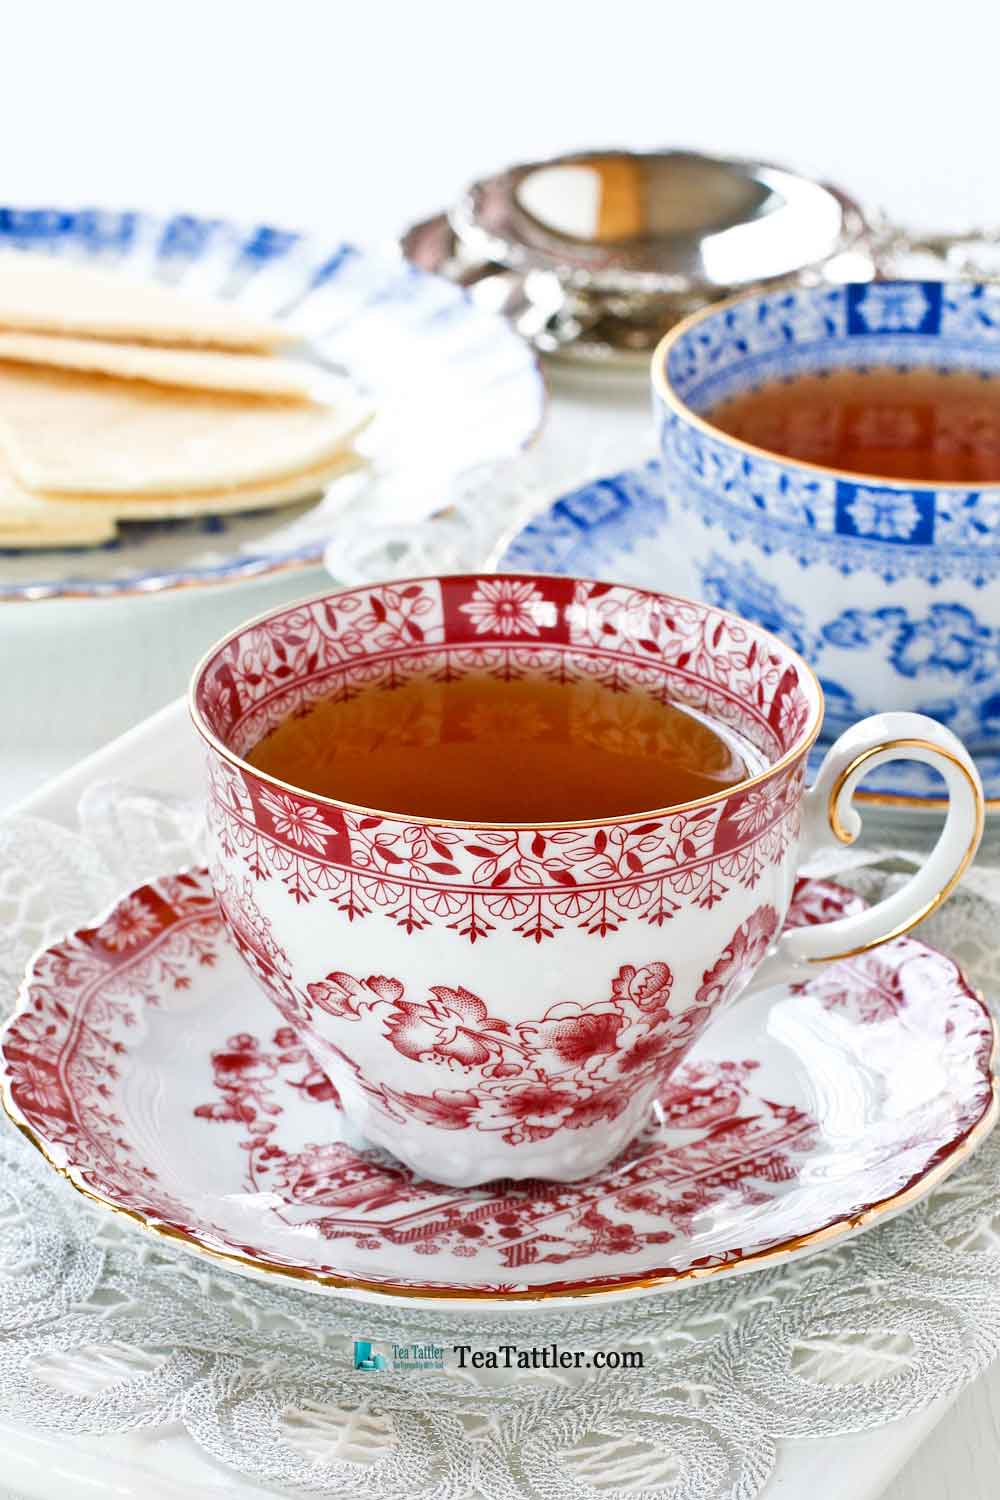 Dainty Dorothea Red Teacup with scalloped foot and floral motifs matching the popular Dorothea China Blue by the same manufacturer. | TeaTattler.com #dorotheateacup #teacup